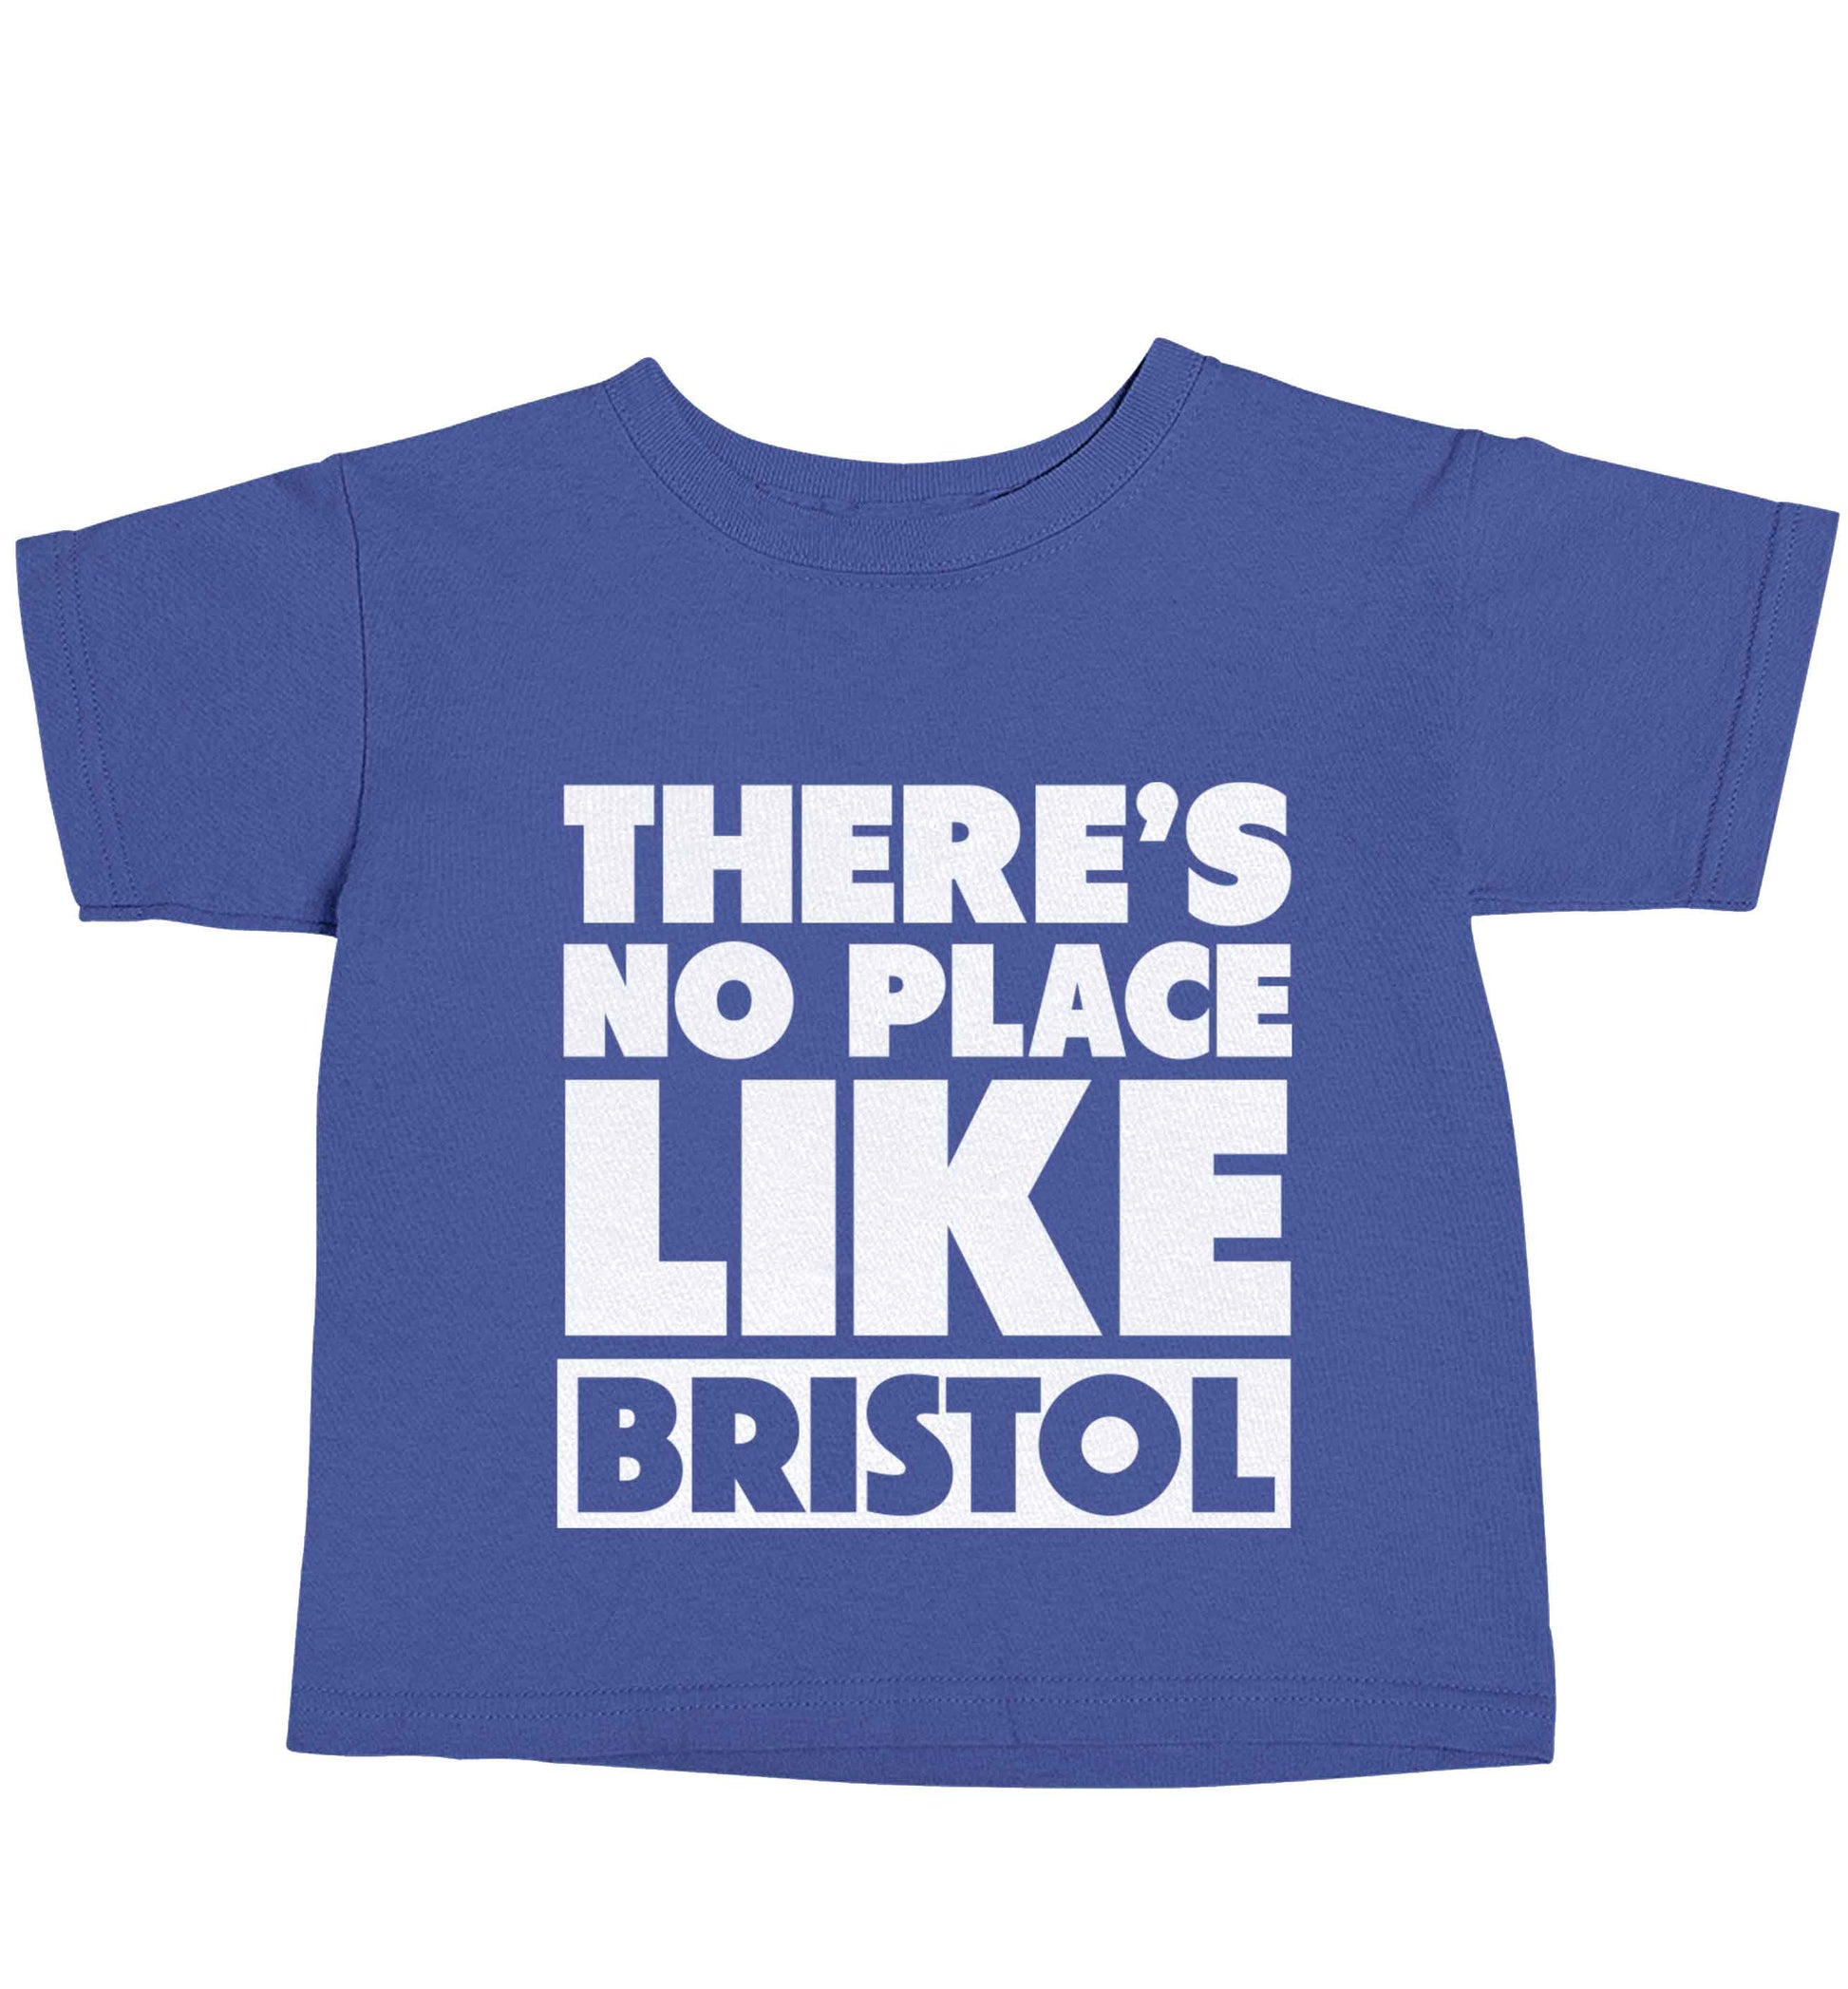 There's no place like Bristol blue baby toddler Tshirt 2 Years